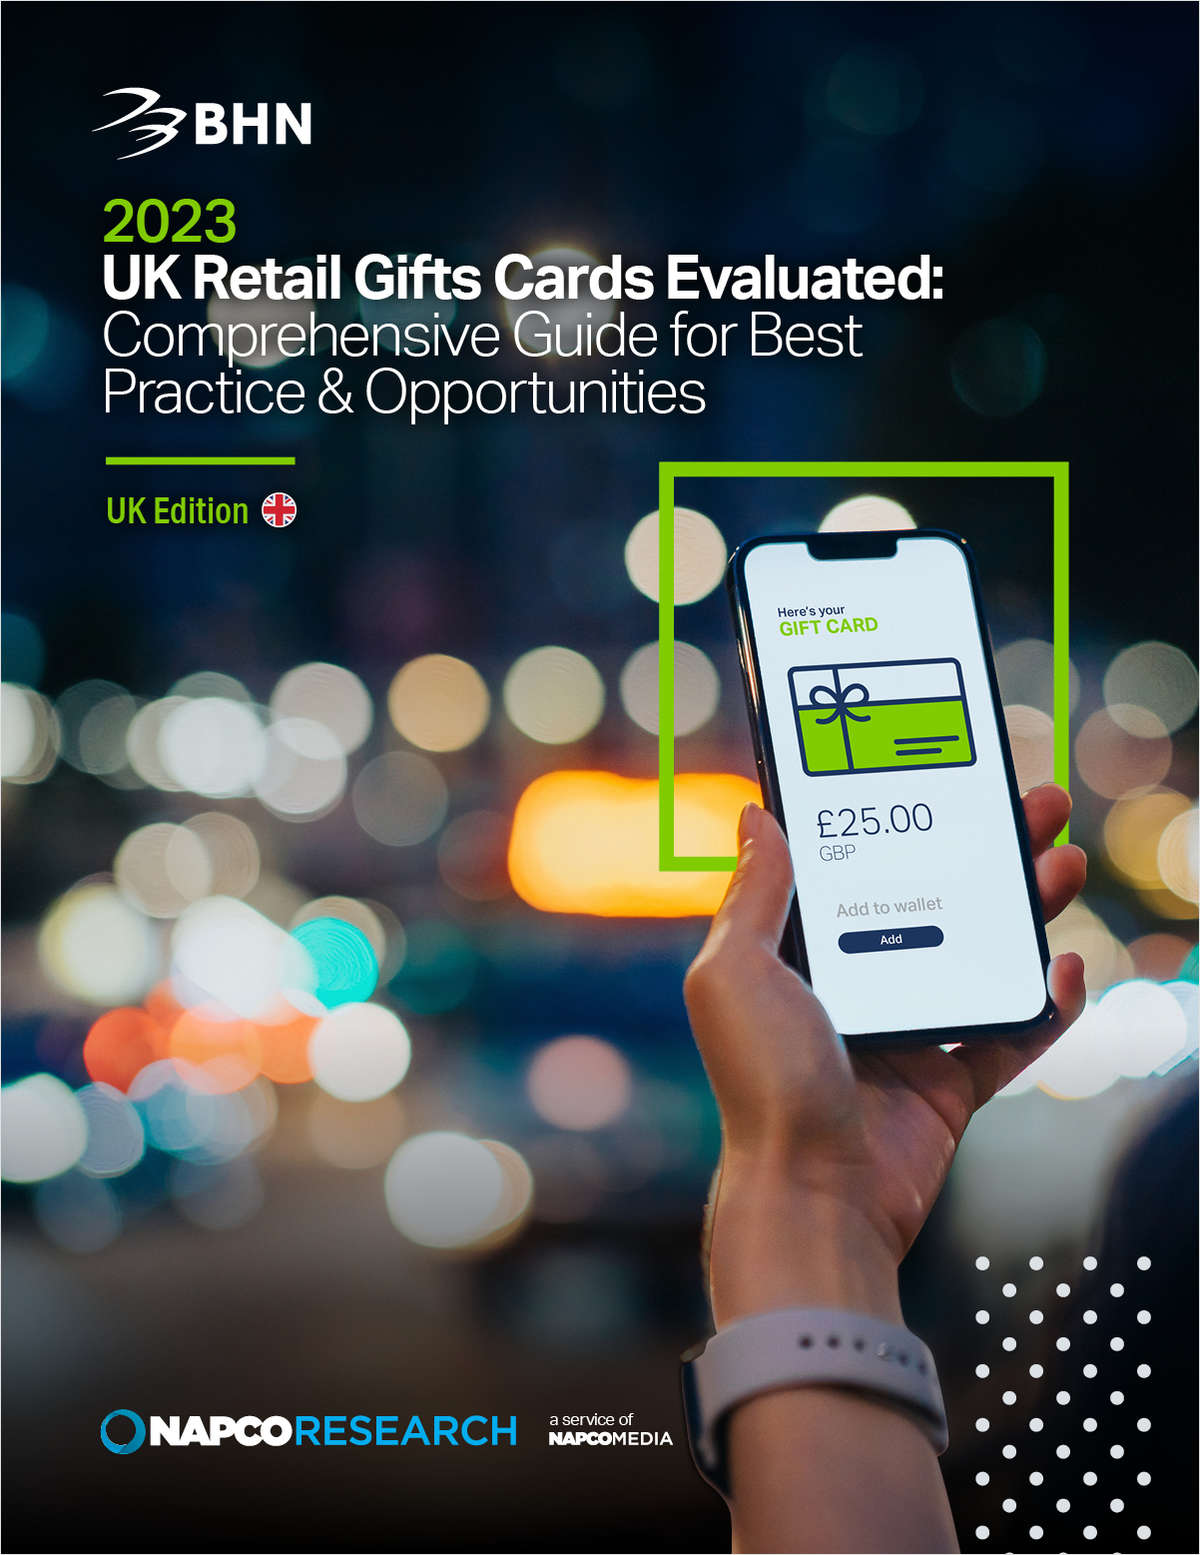 2023 UK Retail Gifts Cards Evaluated: Comprehensive Guide for Best Practice & Opportunities